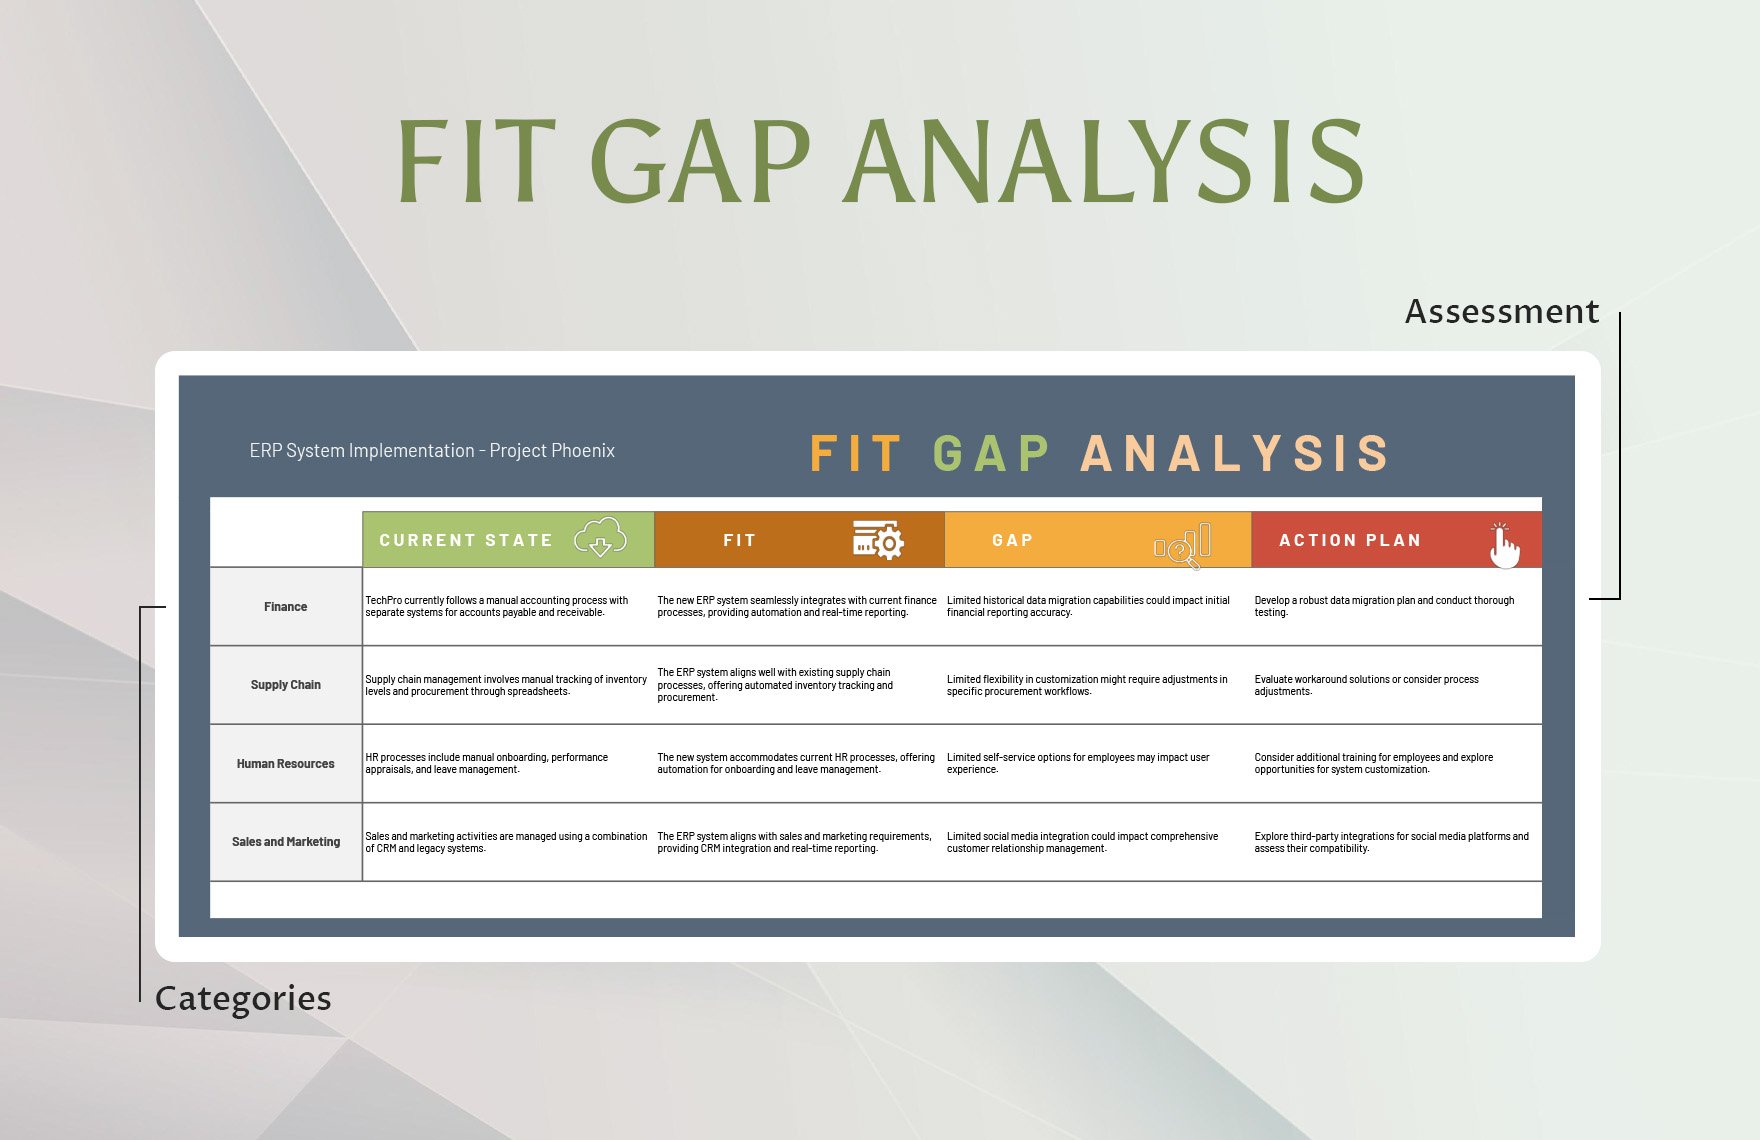 Fit GAP Analysis Template